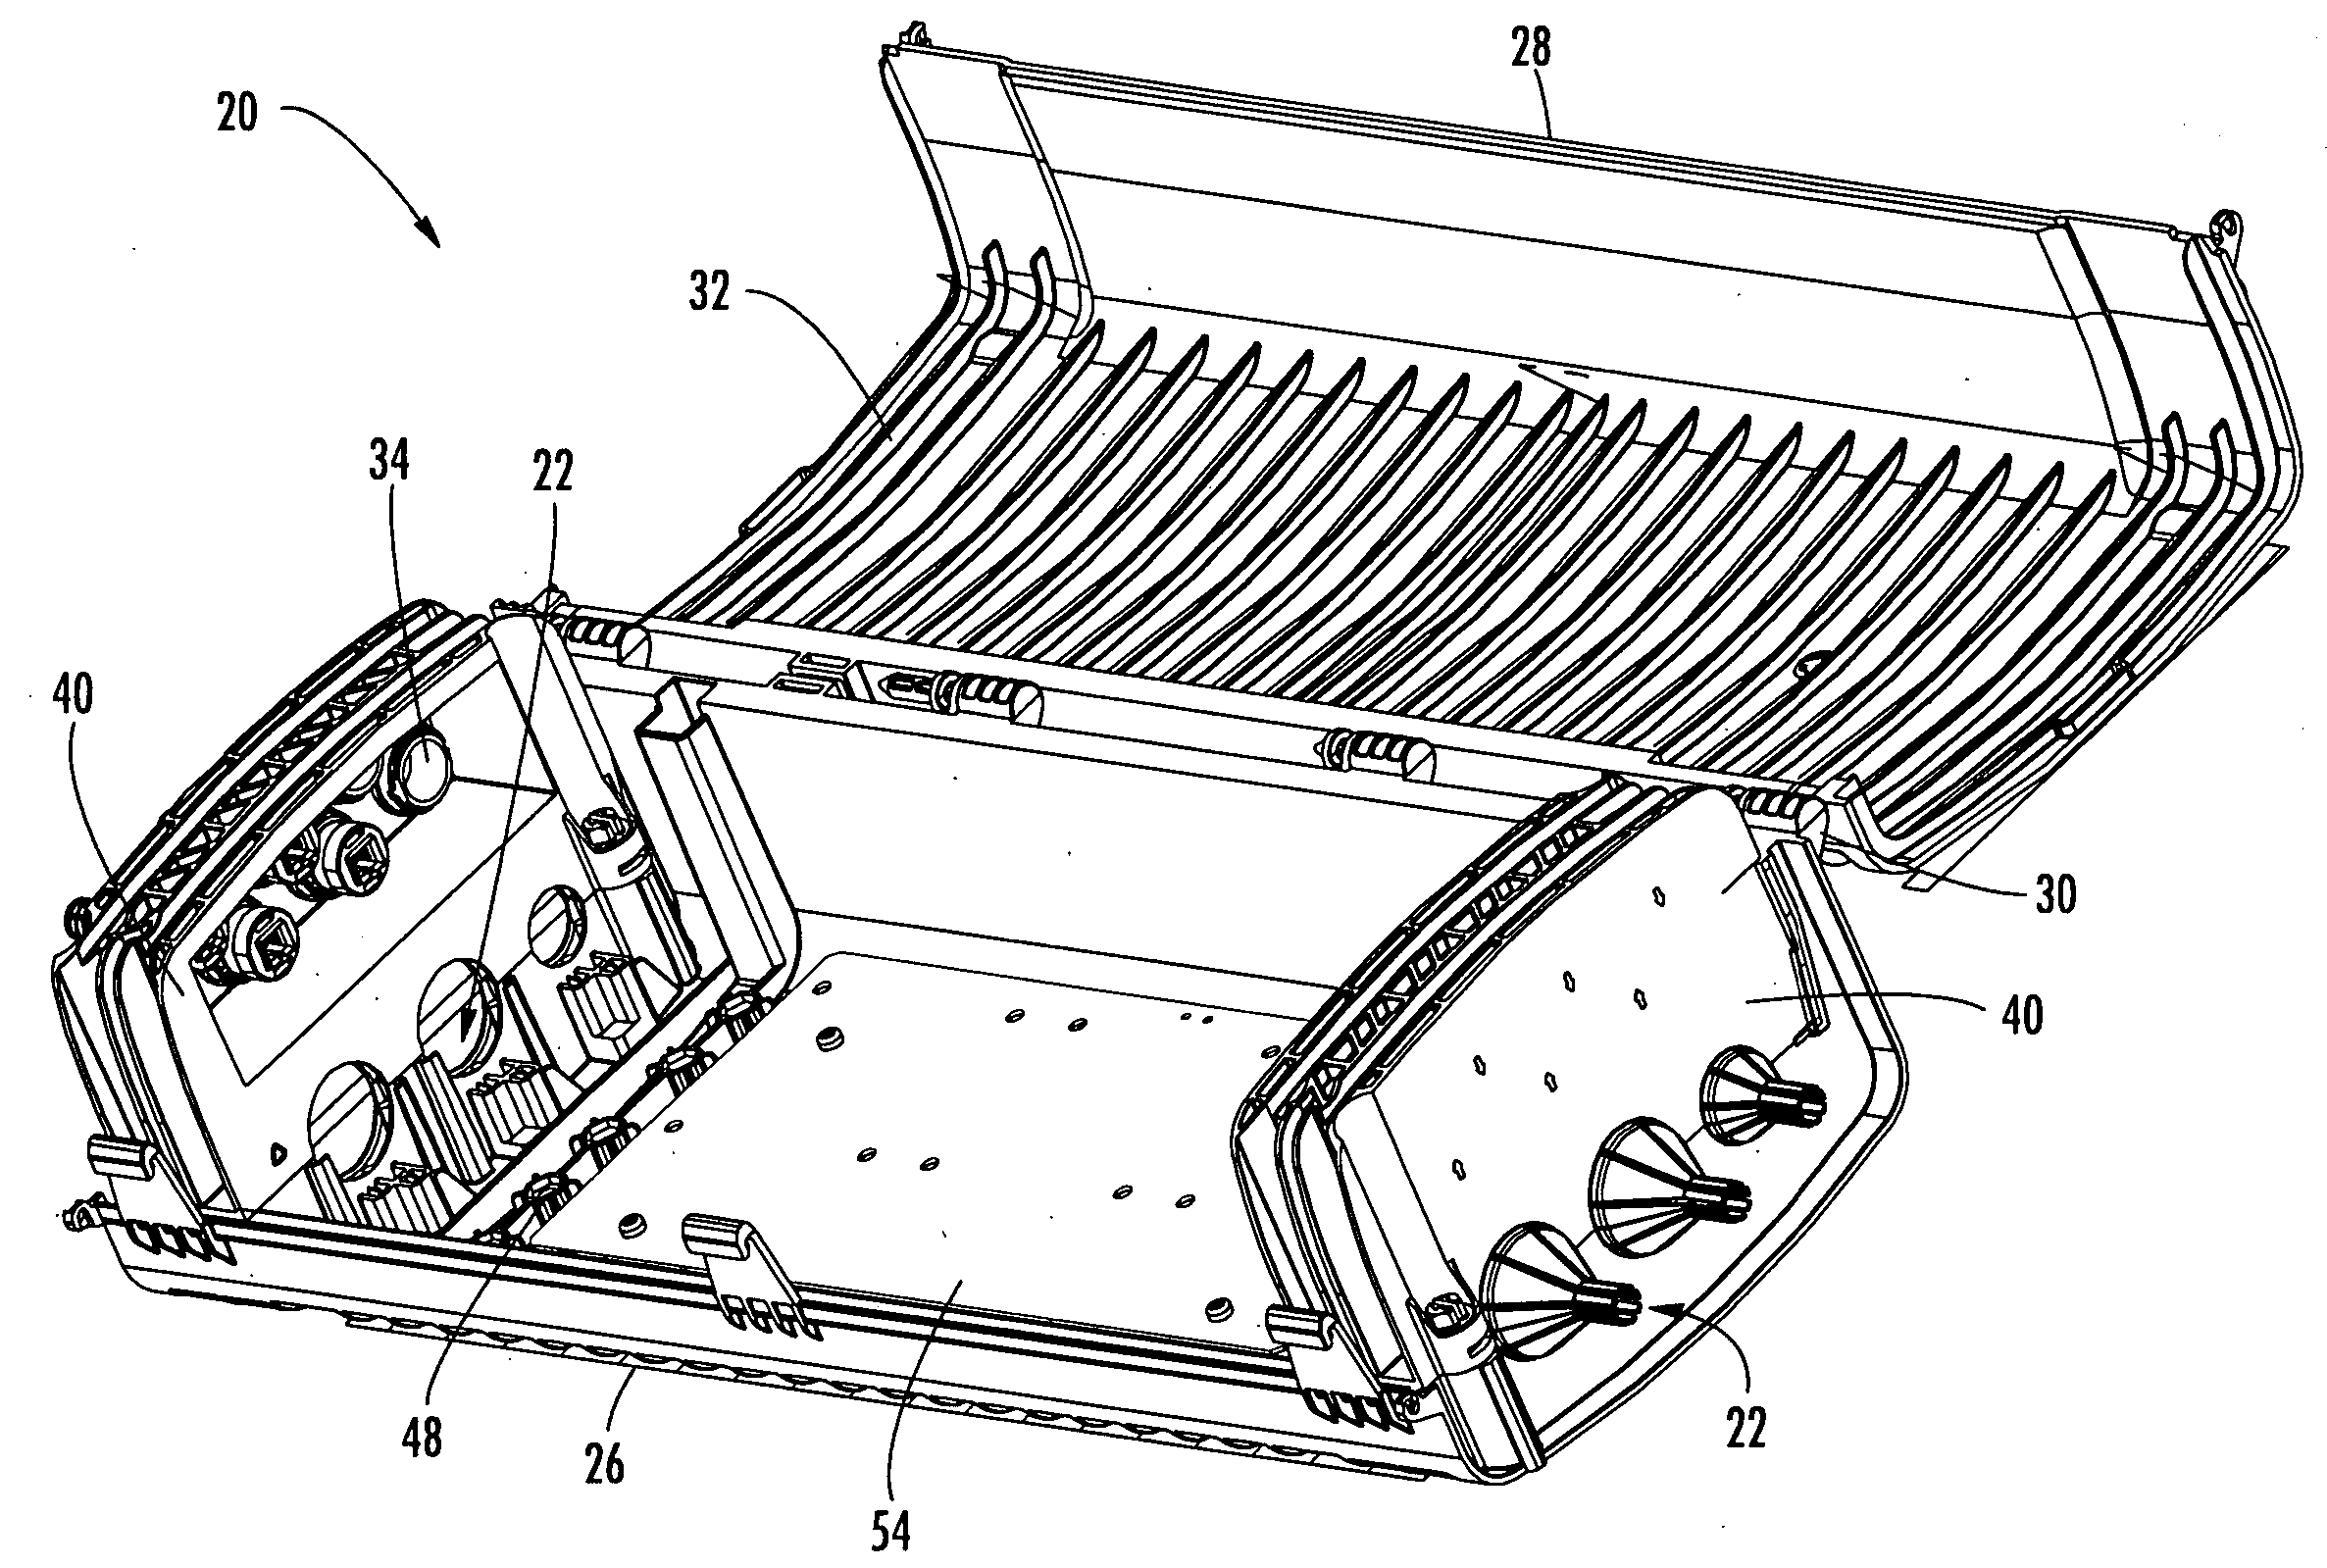 Optical connection closure having at least one connector port